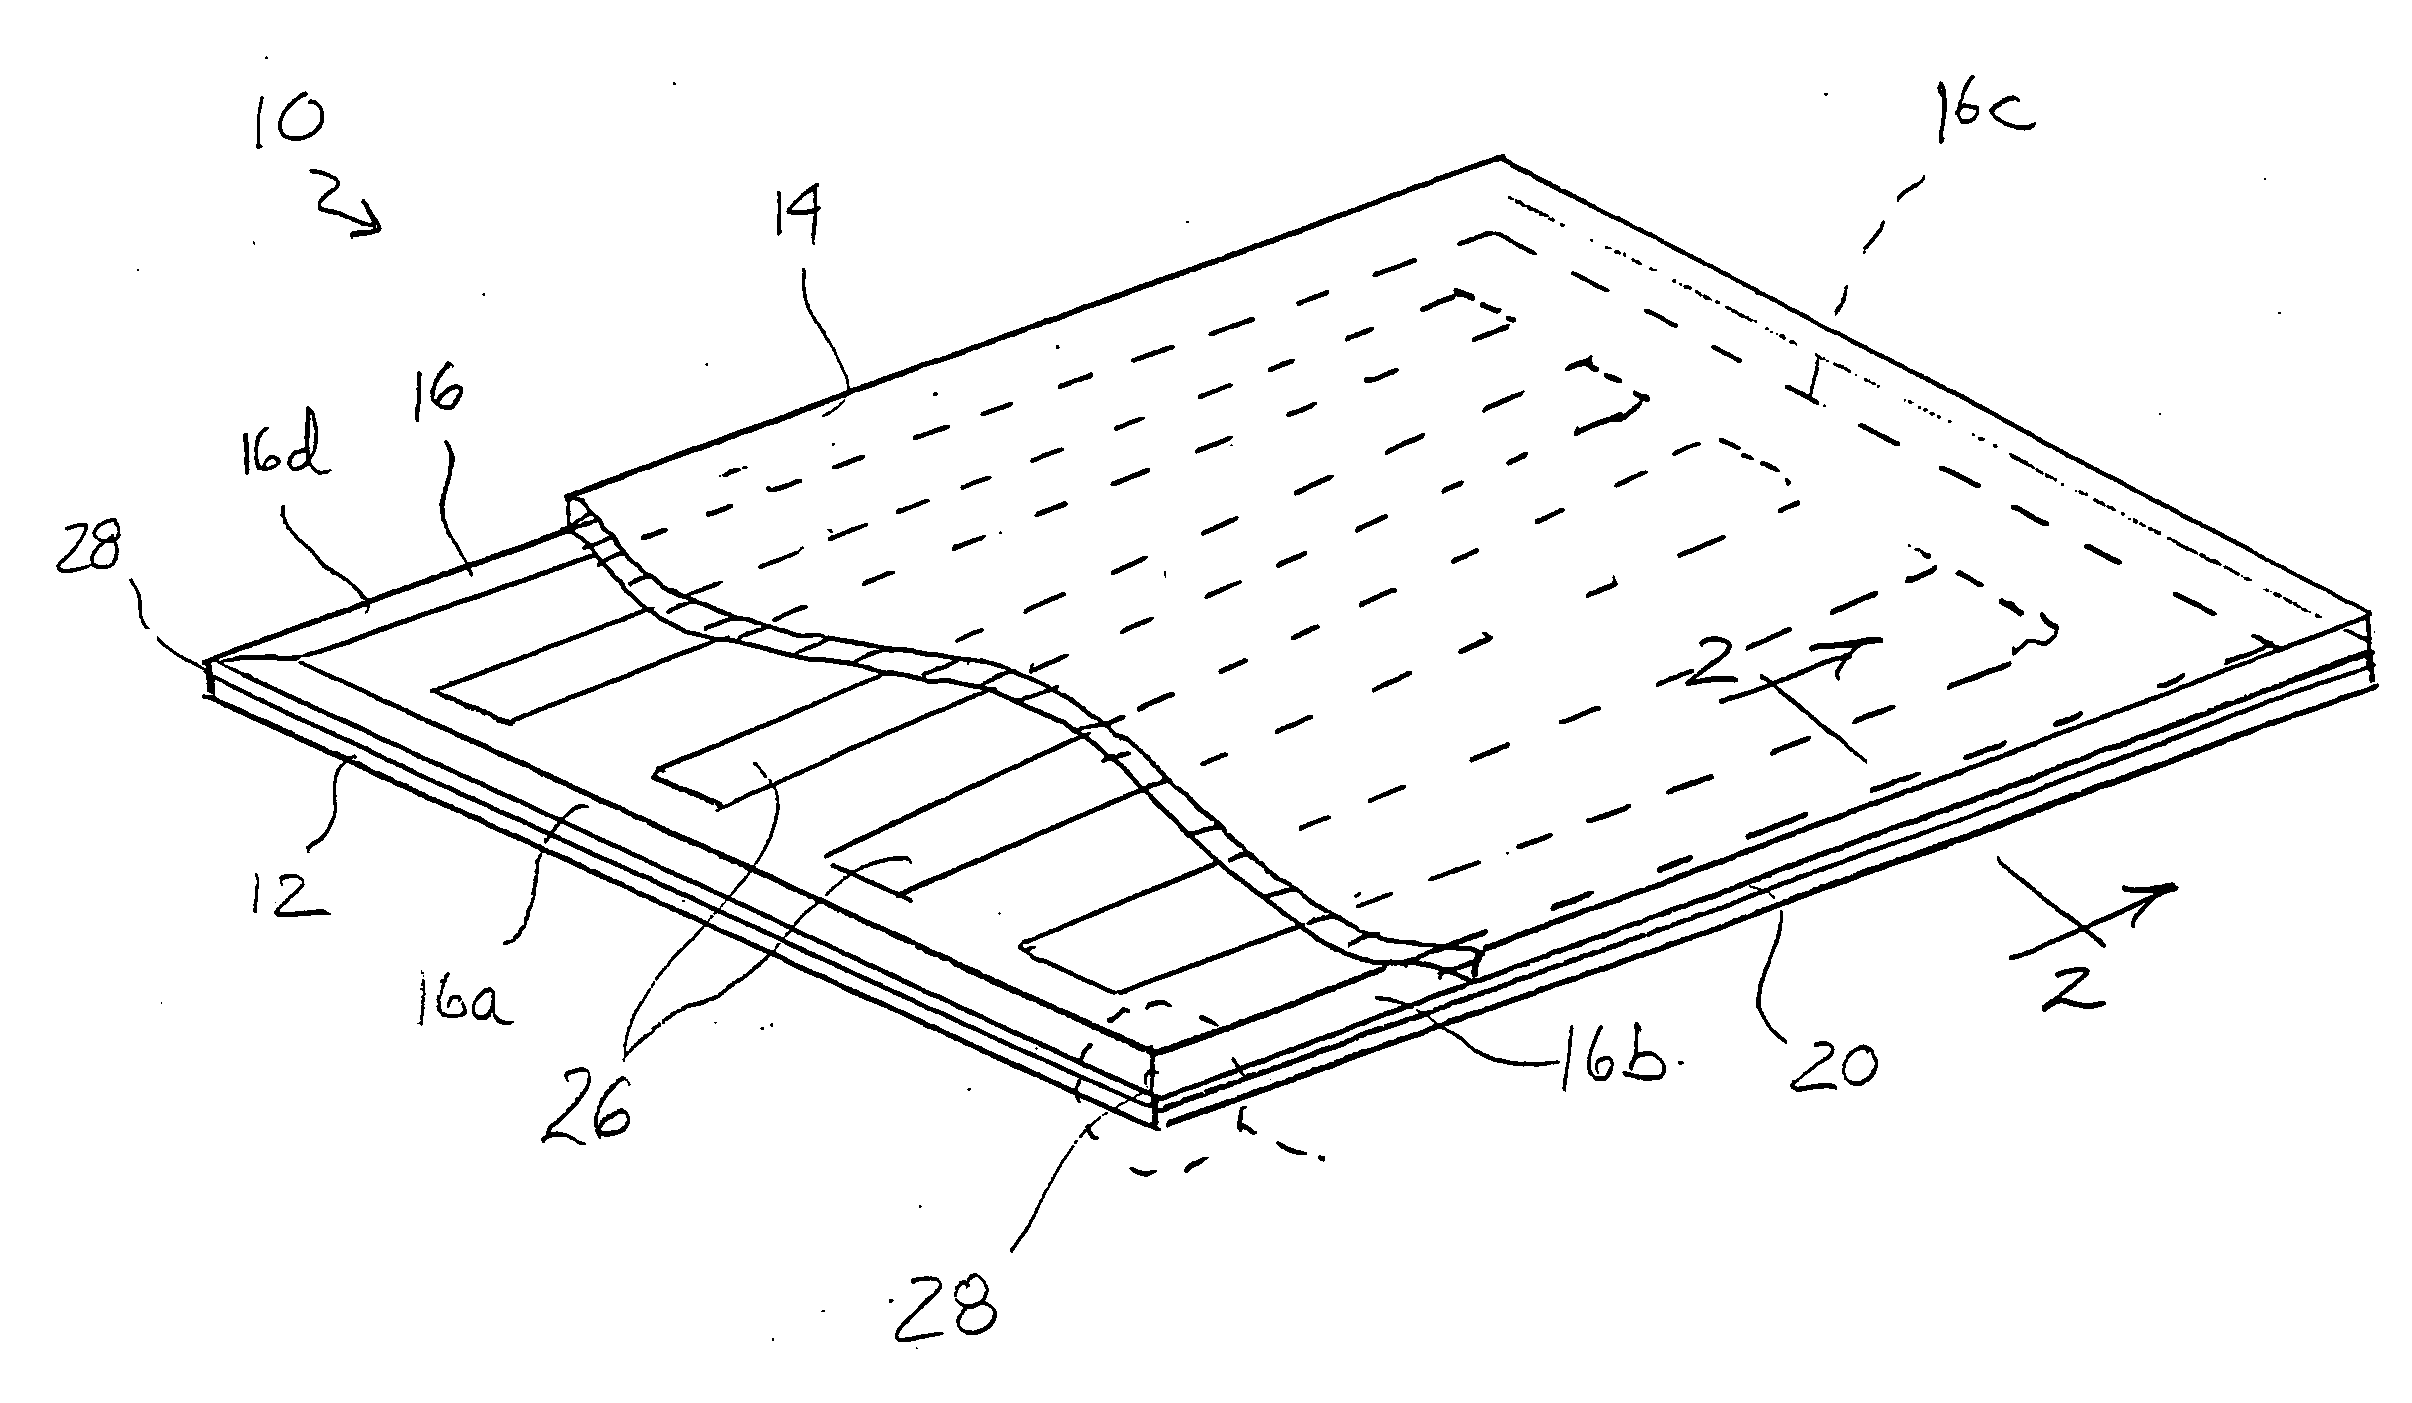 Water resistant switch mat having activation across its entire surface